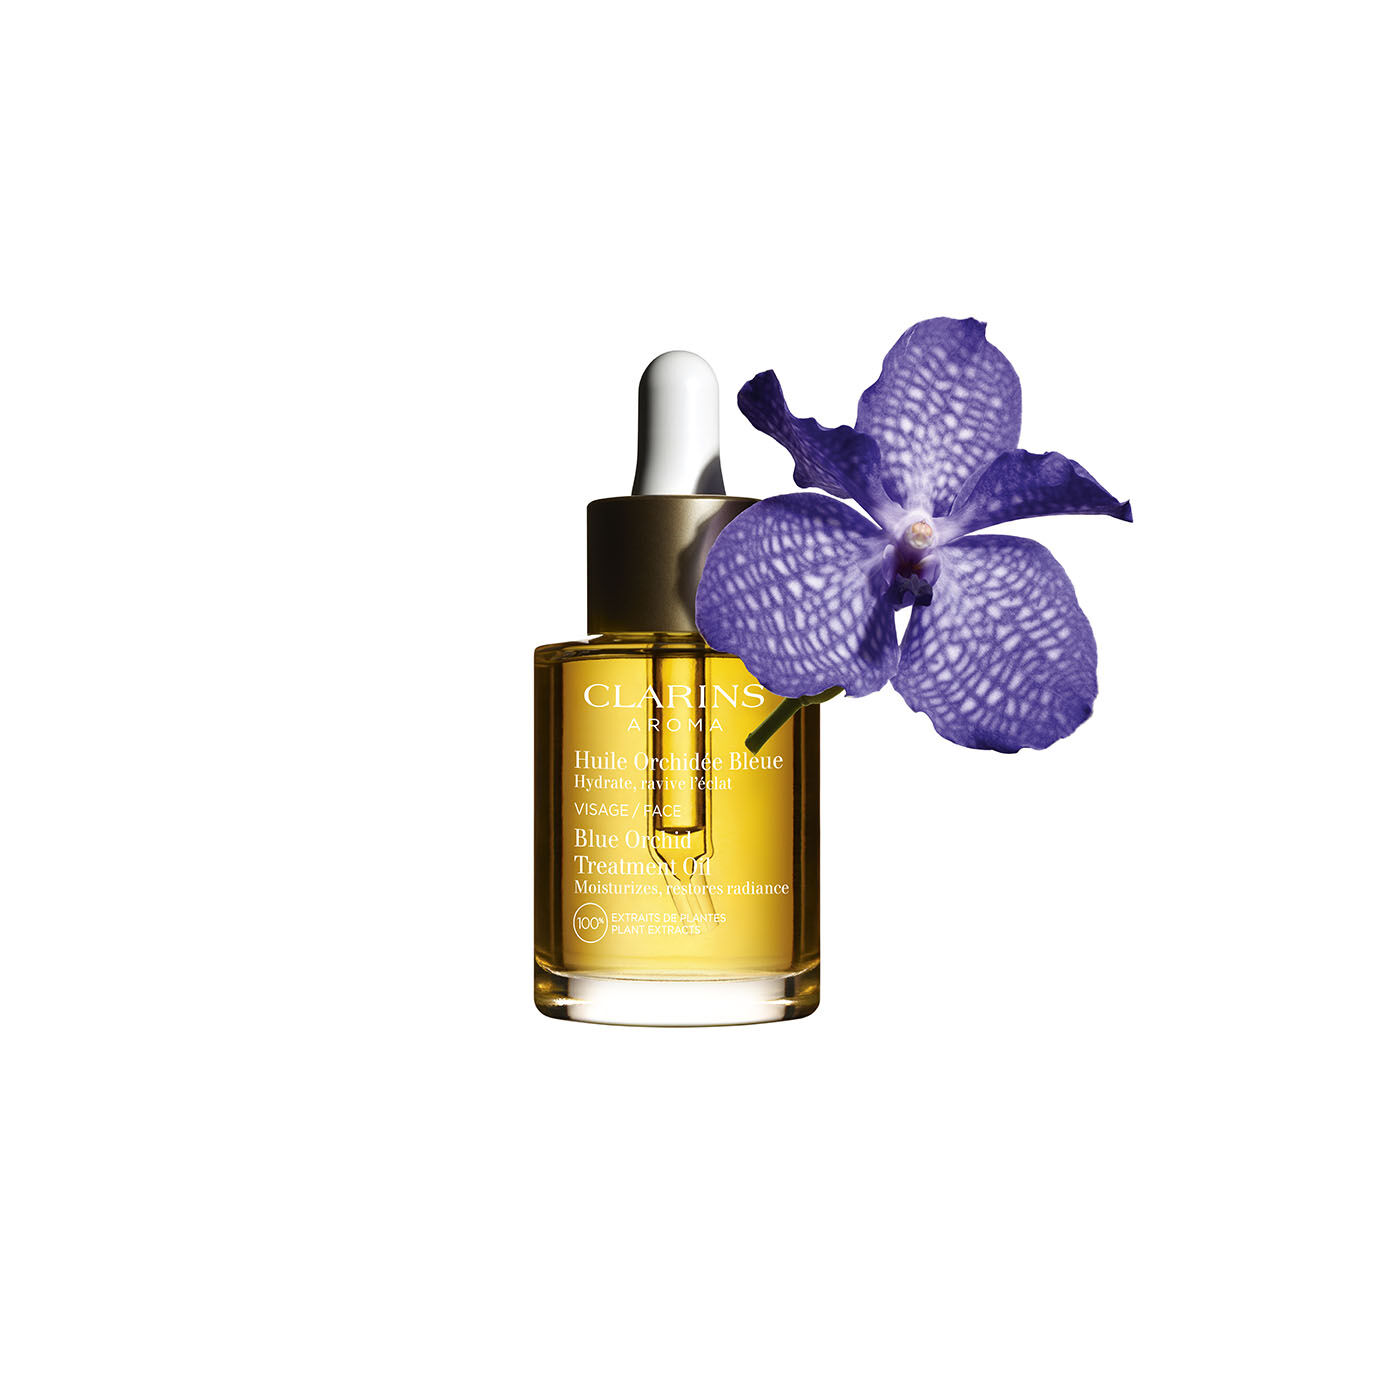 Clarins Blue Orchid Face Treatment Oil In White